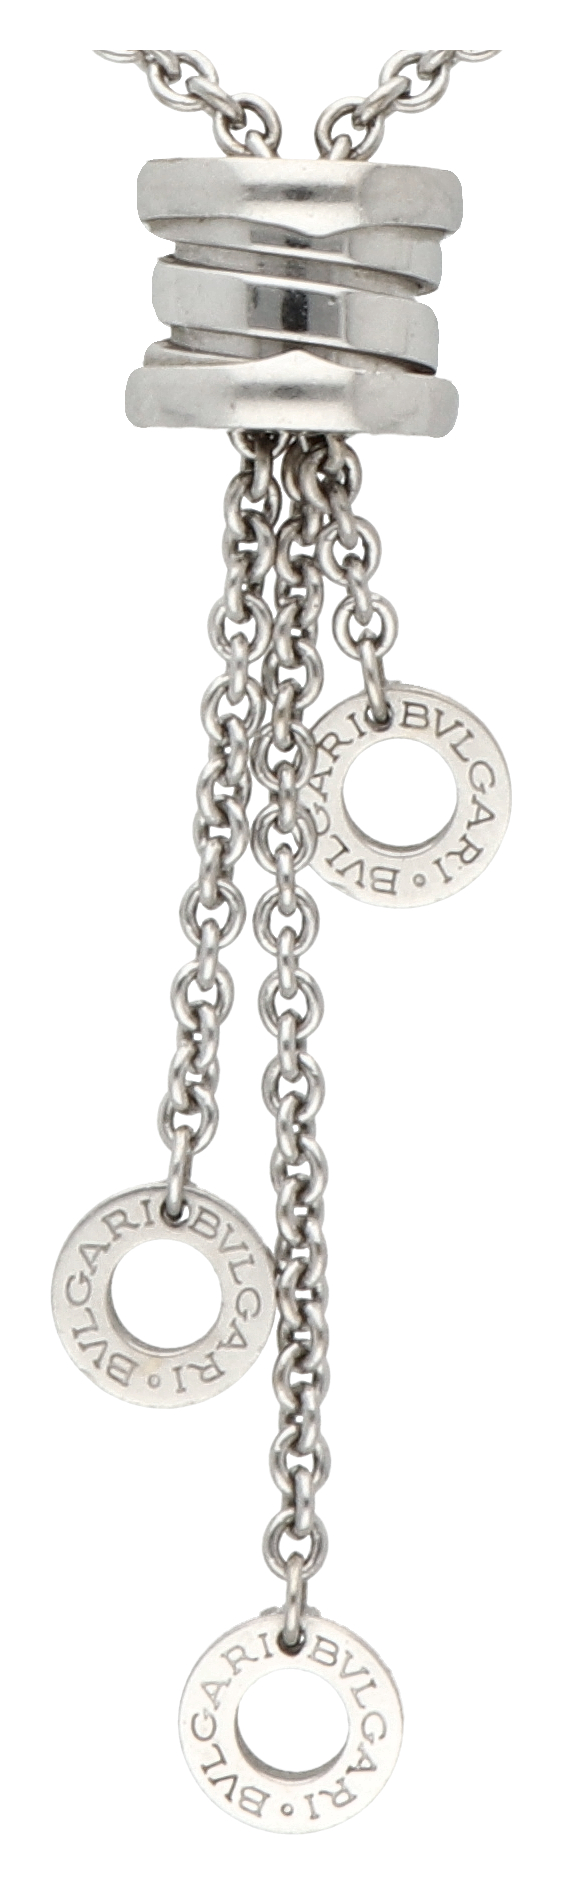 No Reserve - Bvlgari 18K white gold necklace. - Image 2 of 4